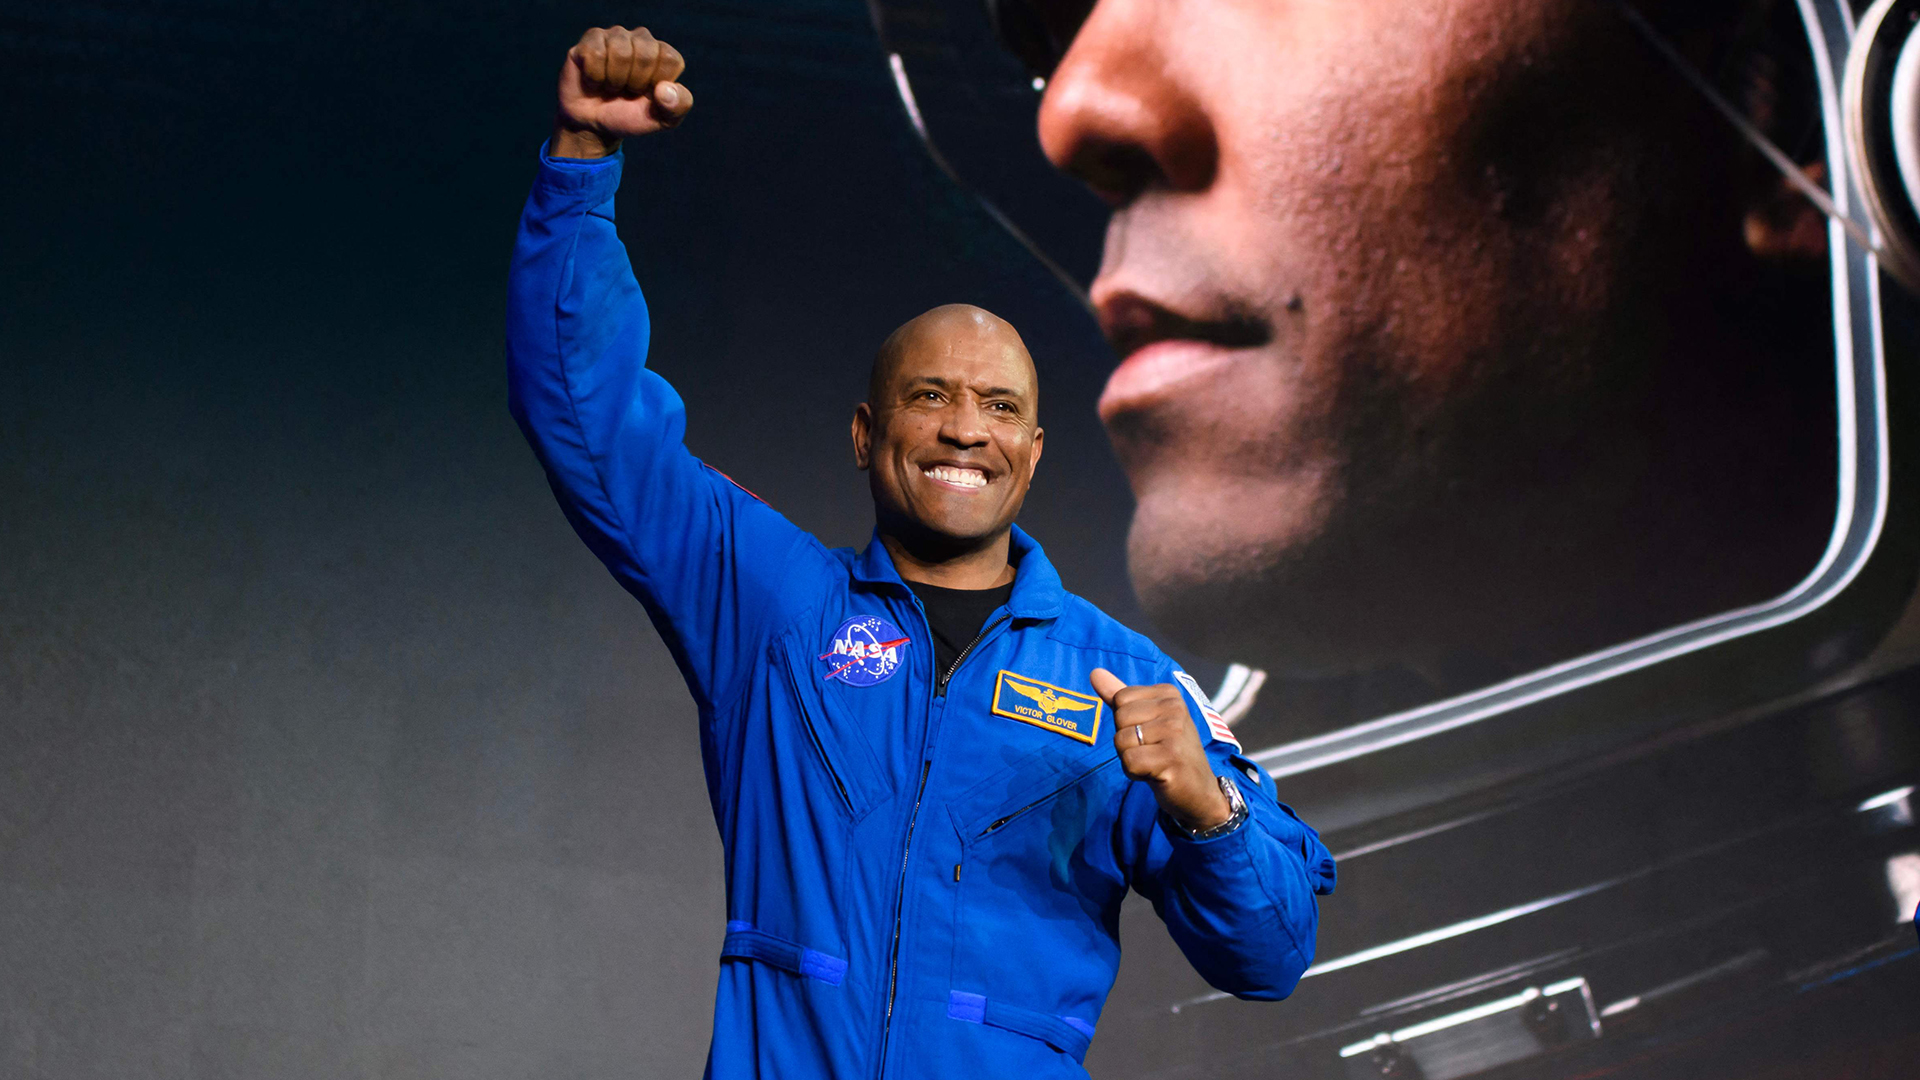 Victor Glover Set To Become The First Black Man NASA Sends To The Moon